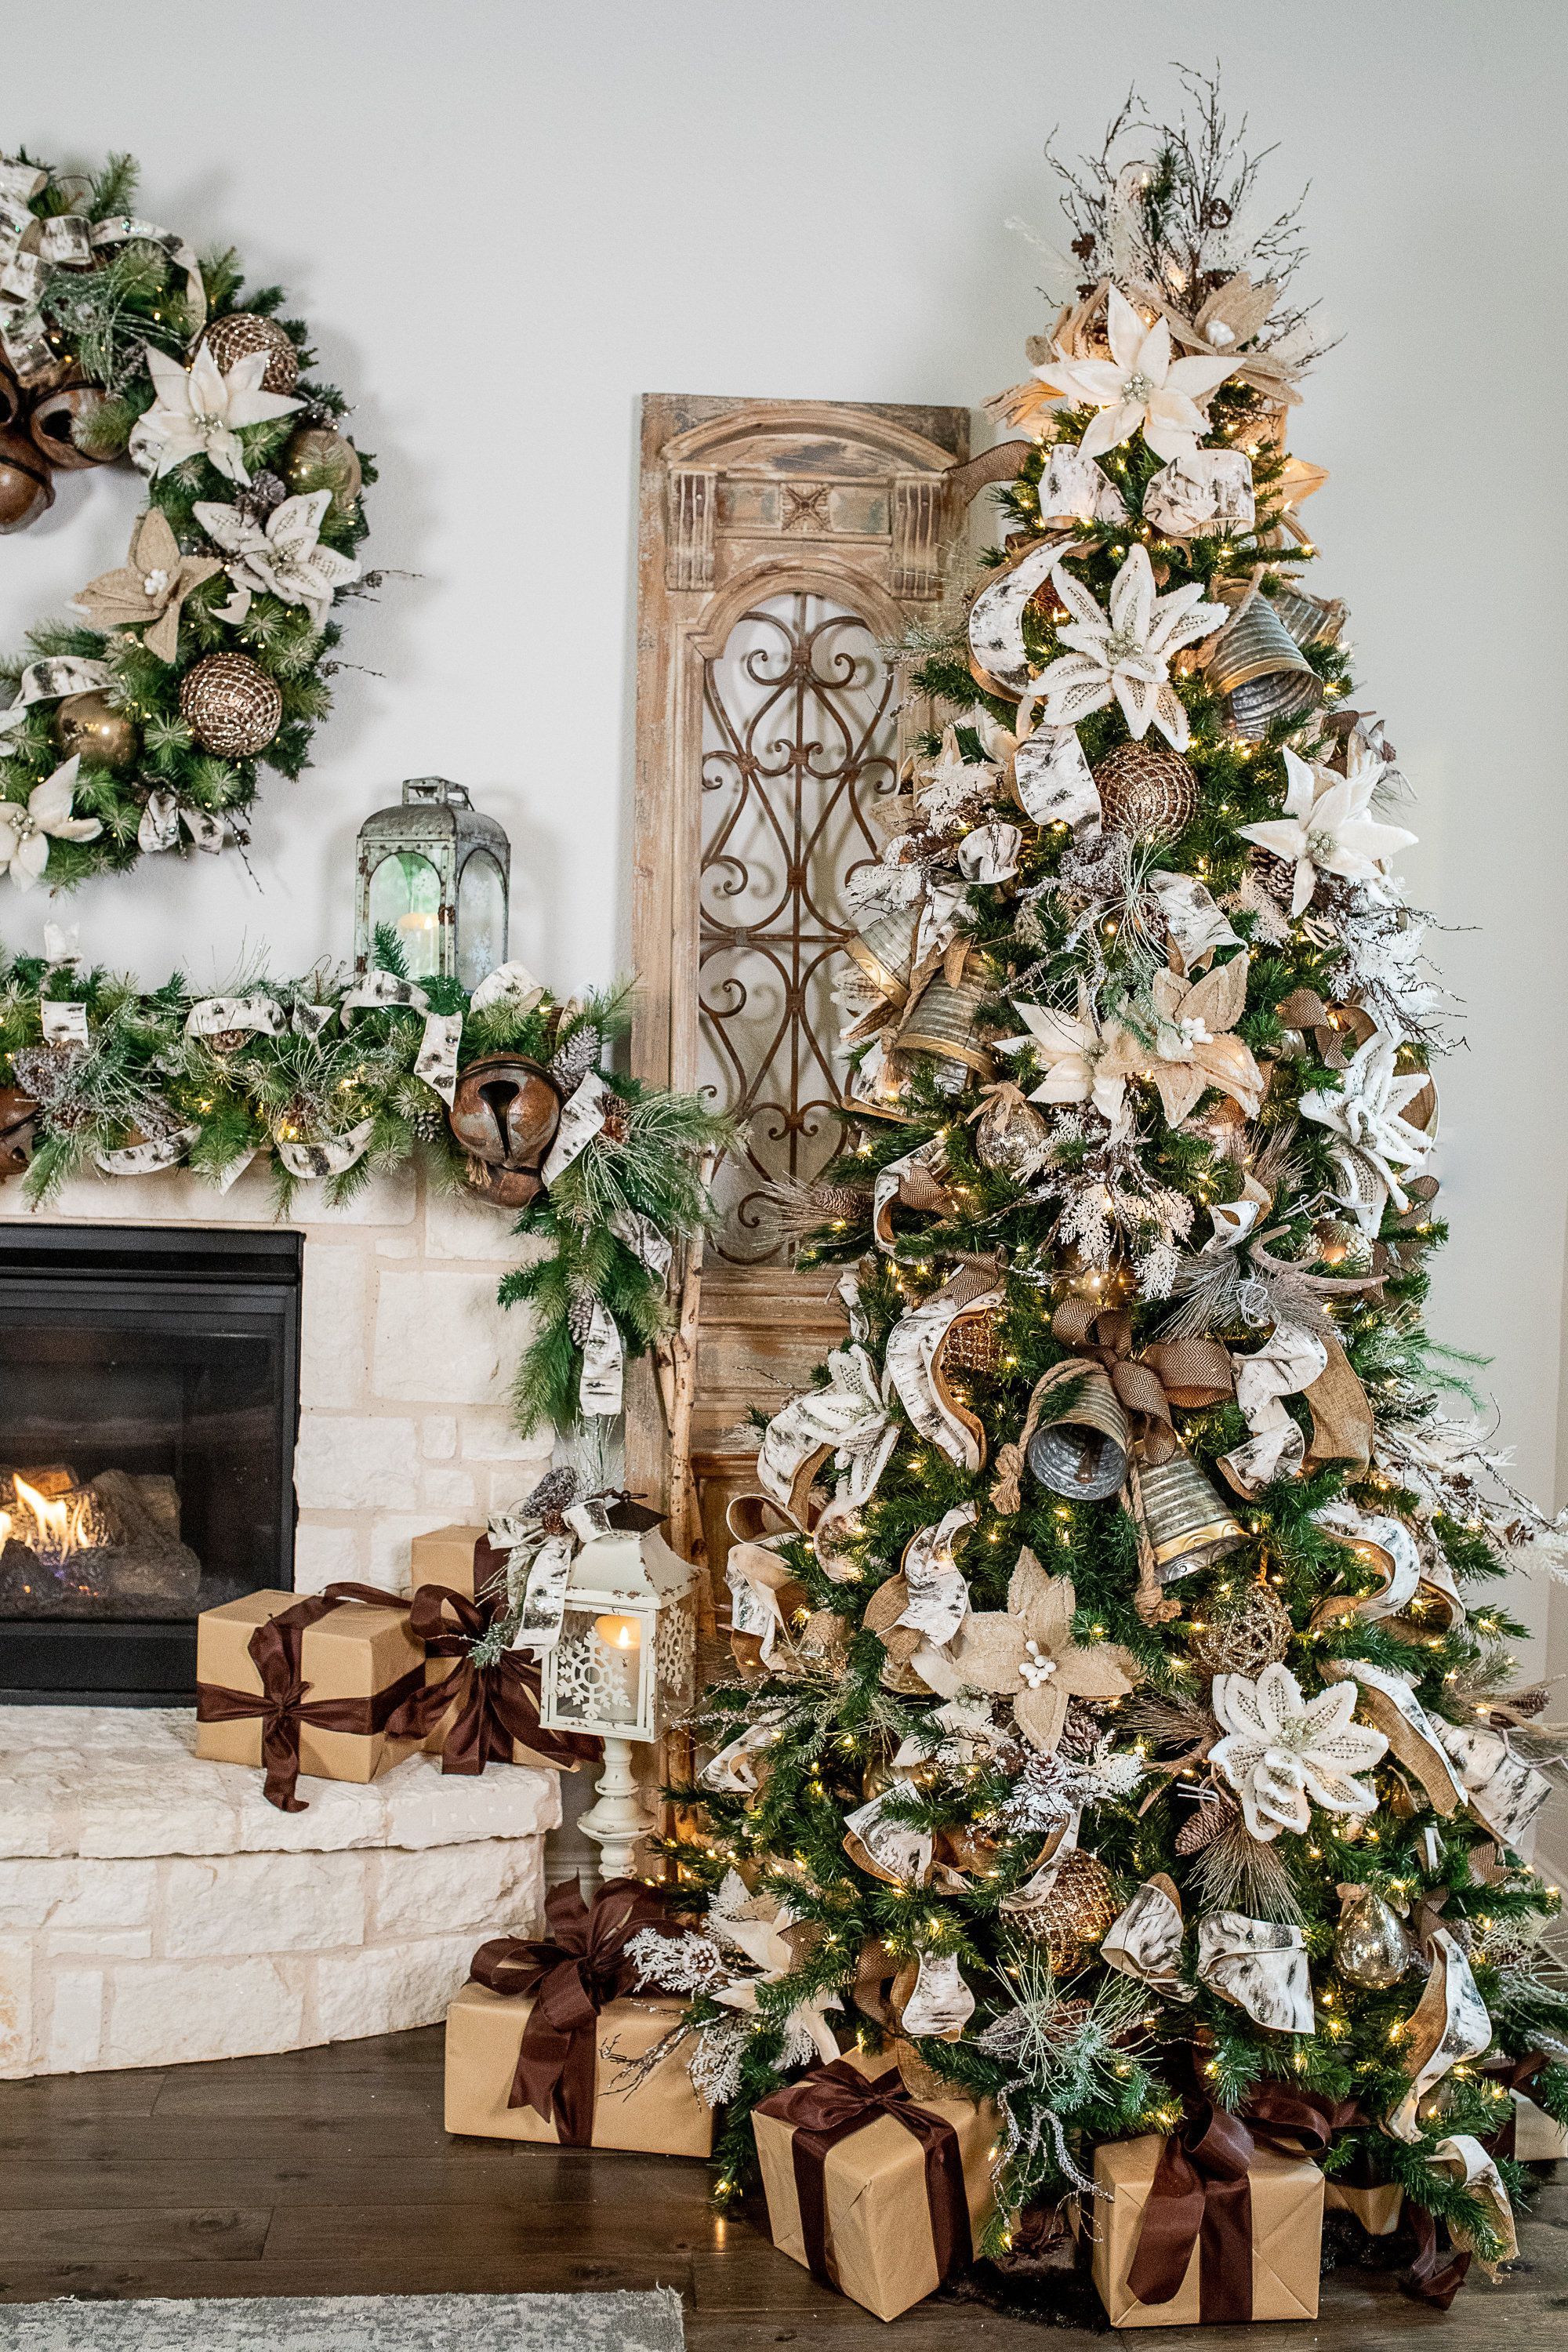 Top Trends in Christmas Home Decor for 2020 - Top Trends in Christmas Home Decor for 2020 -   17 christmas tree decorations 2020 ideas